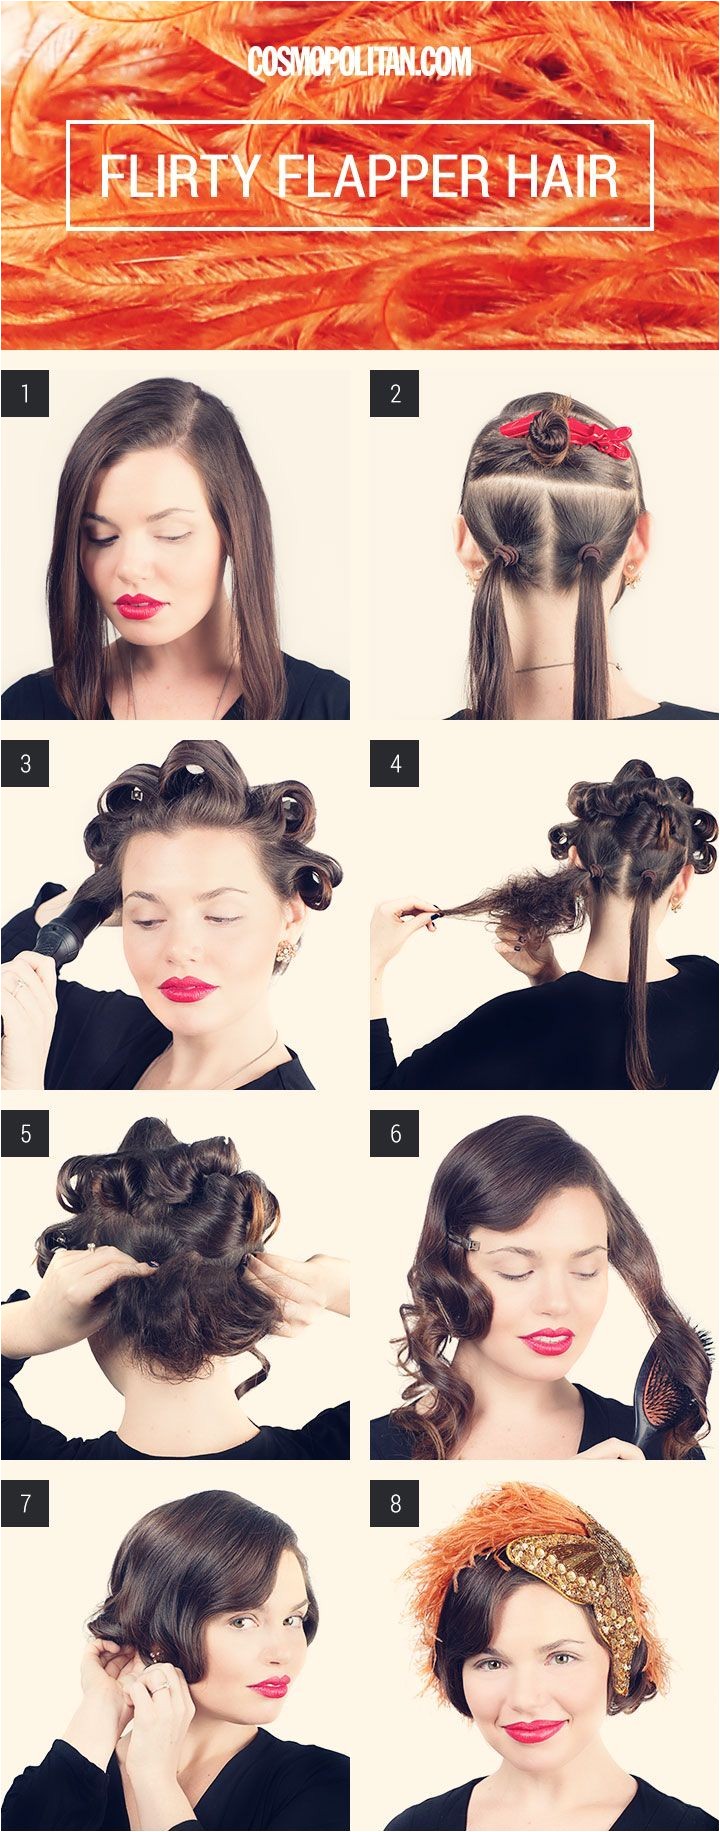 FLIRTY FLAPPER BOB Make your long hair look like a short and wavy bob with this tutorial from Matt Fugate